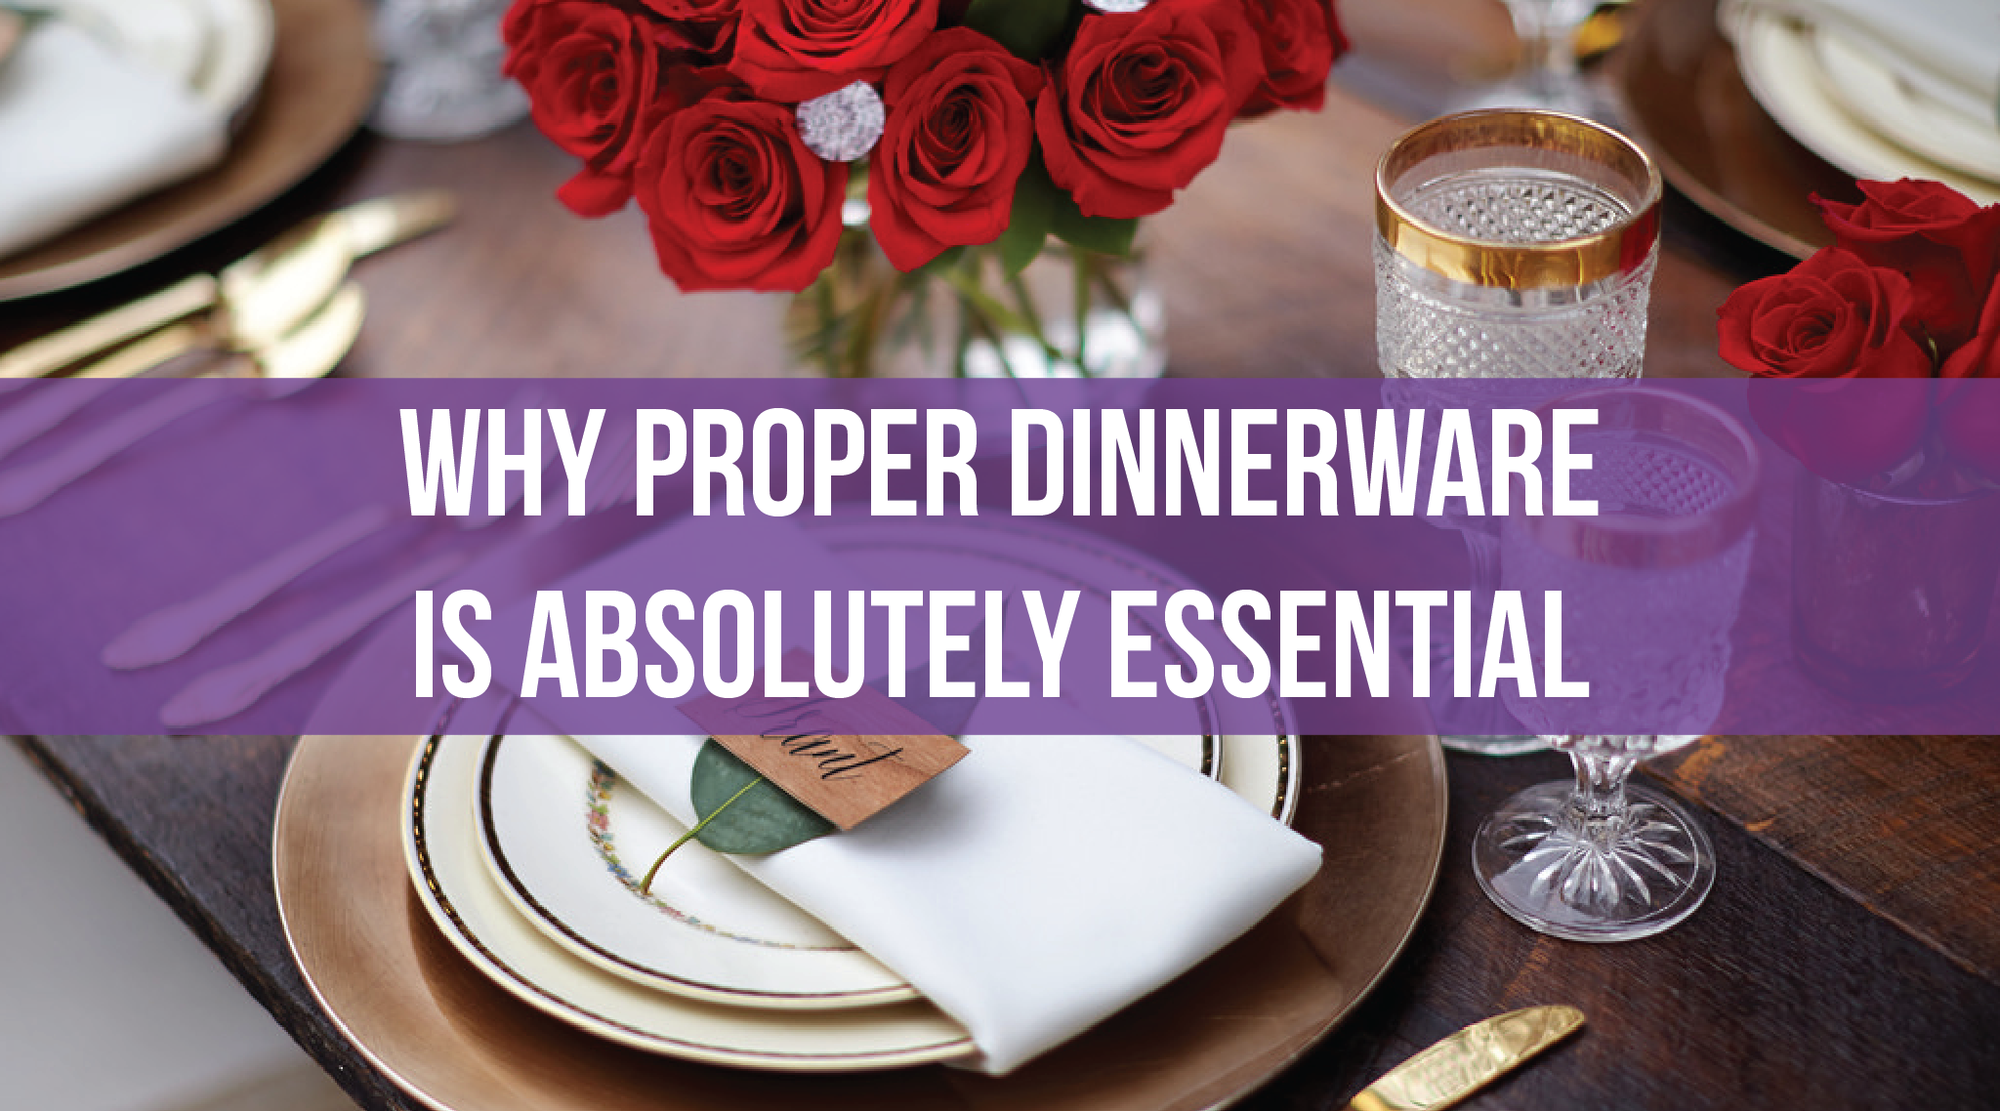 Why Proper Dinnerware is Absolutely Essential